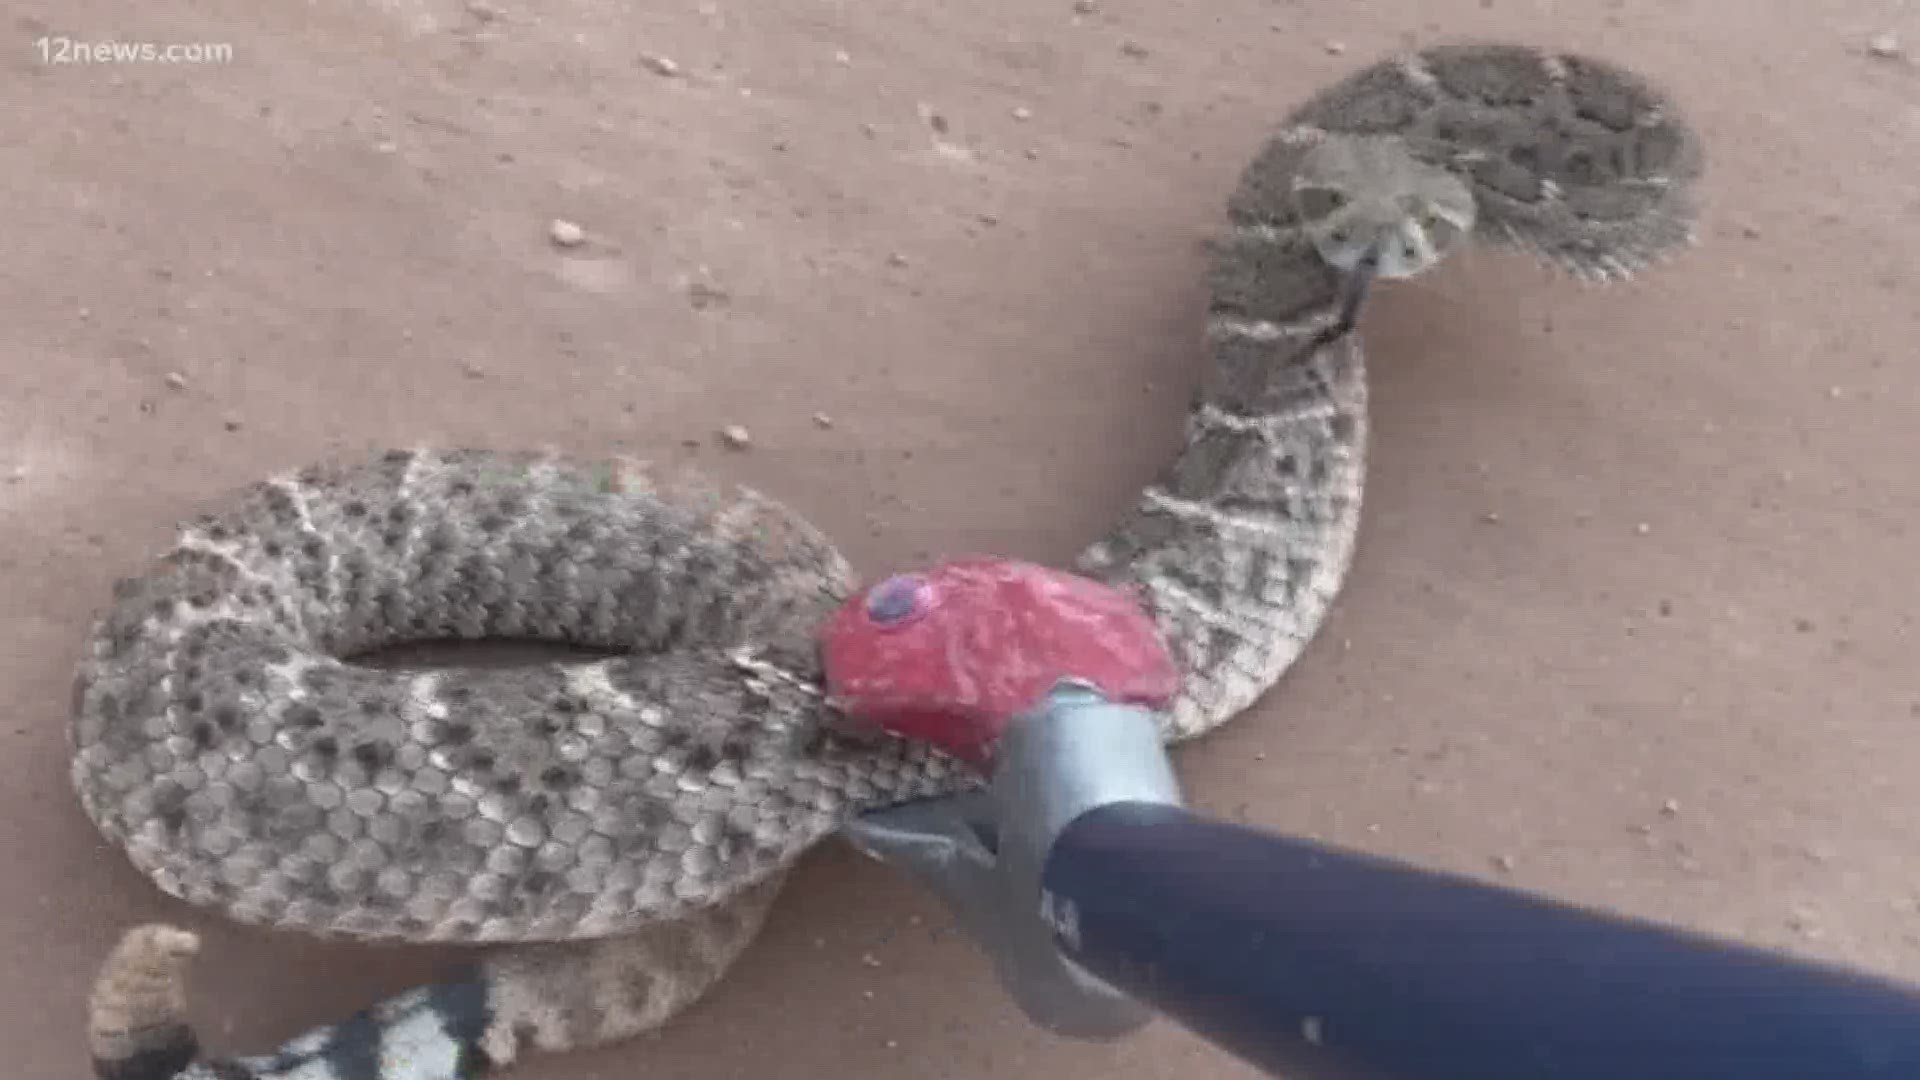 Jason Winfrey was one Arizonan who found out his backyard was a good place to cool down for snakes.